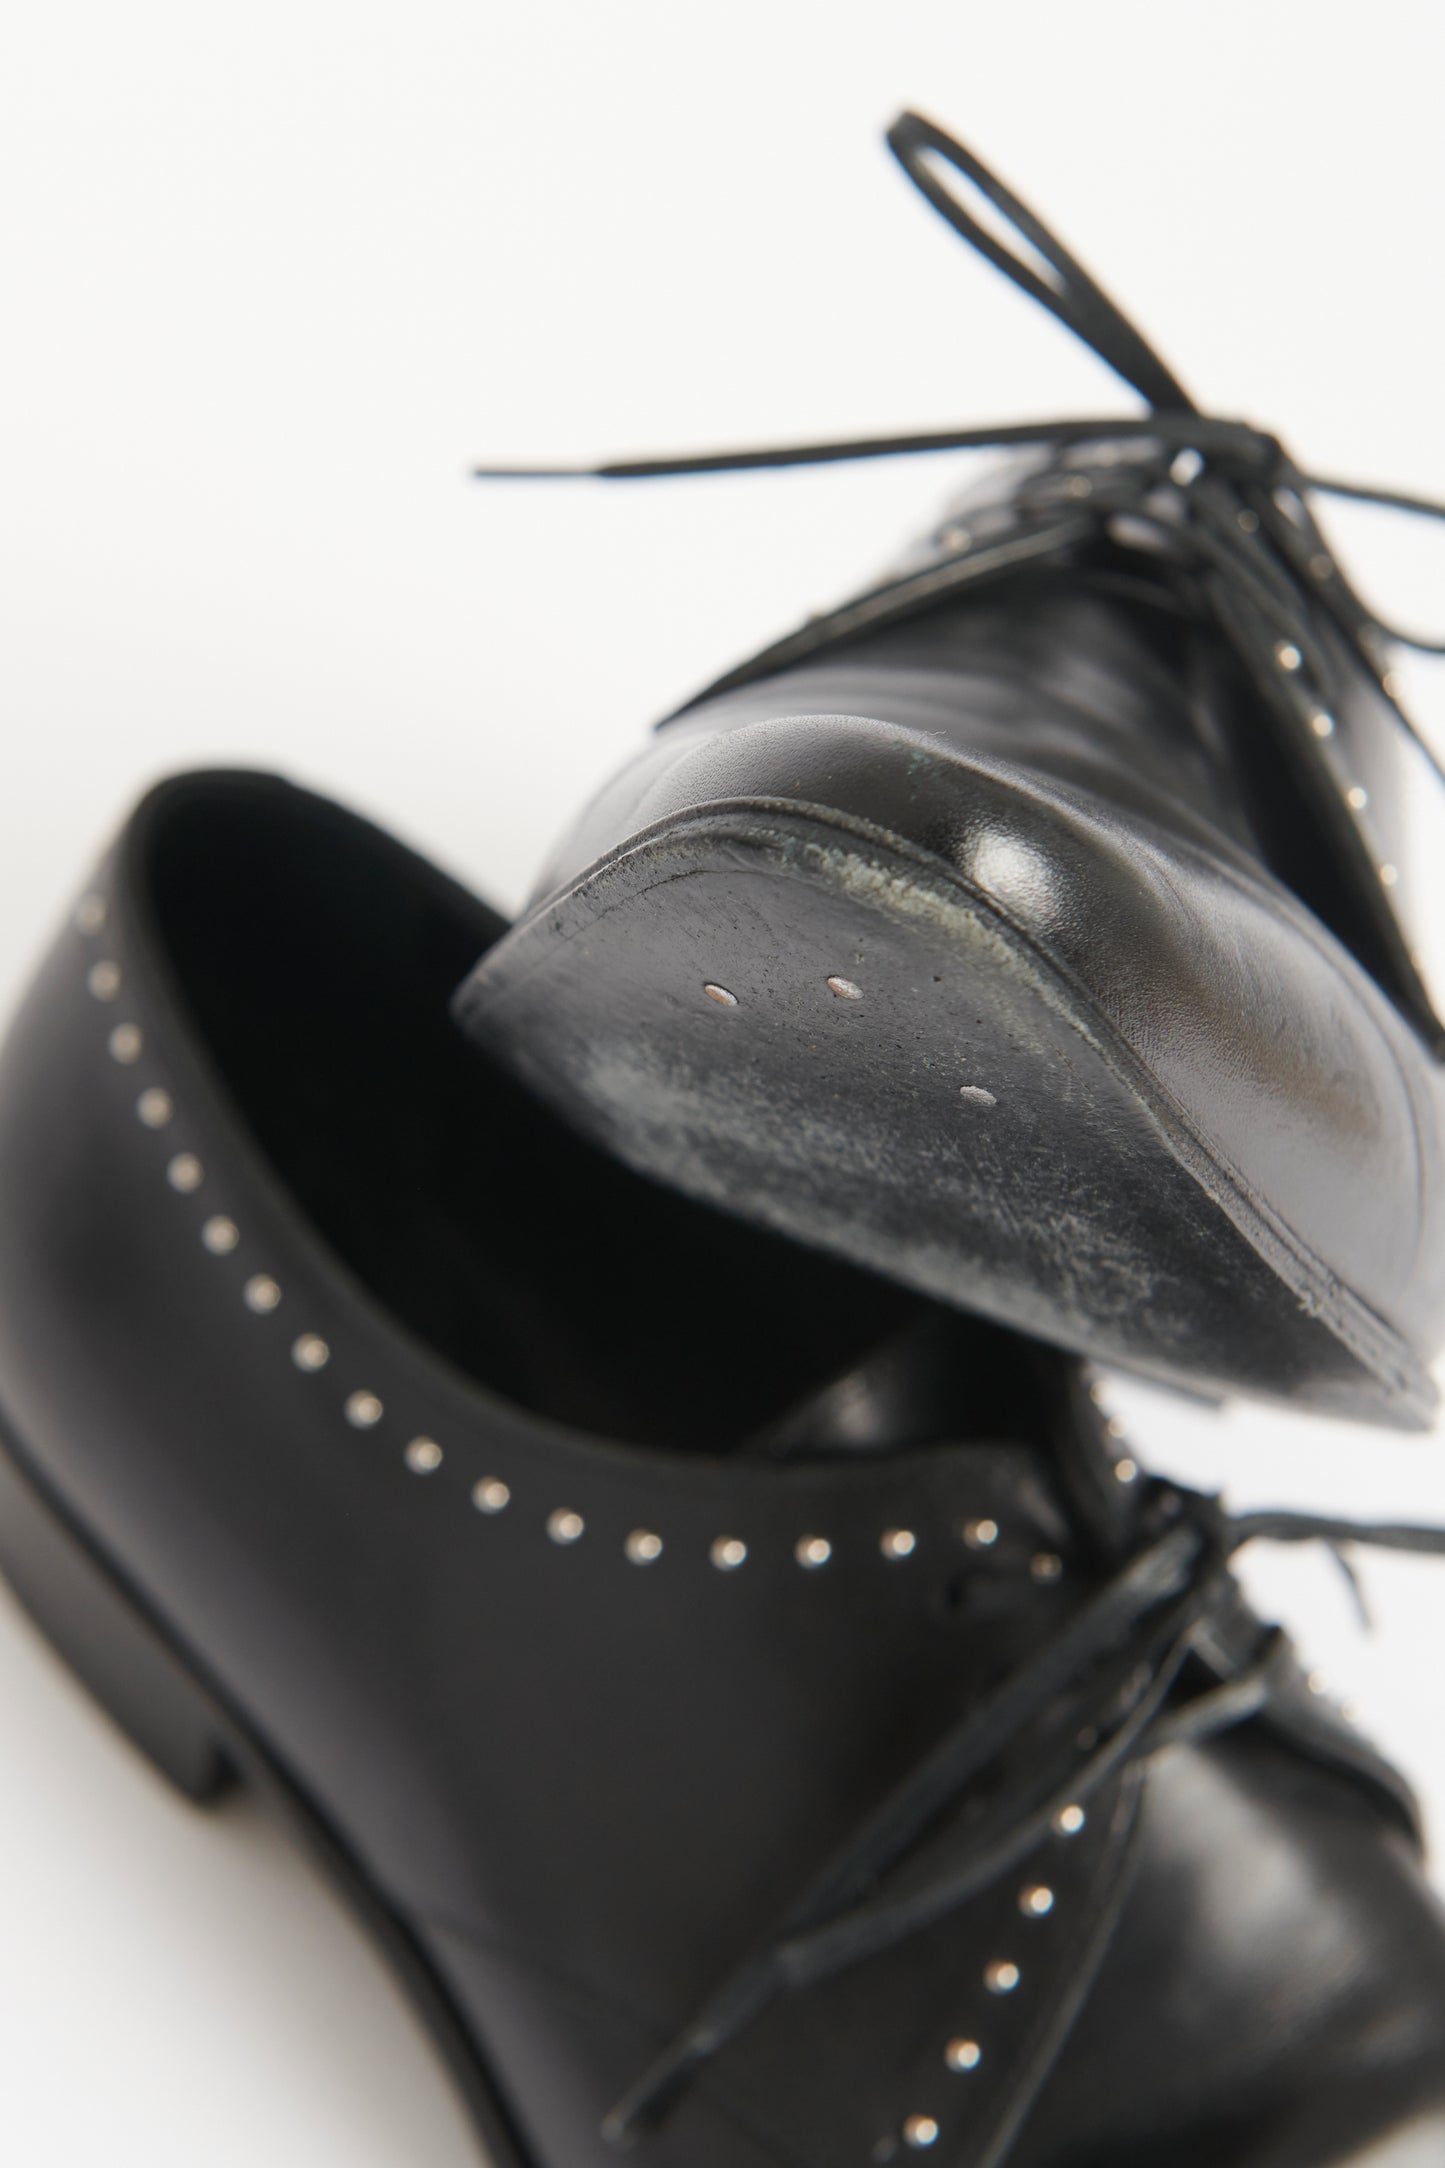 Black Leather Preowned Lace Up Jacno Studded Oxfords